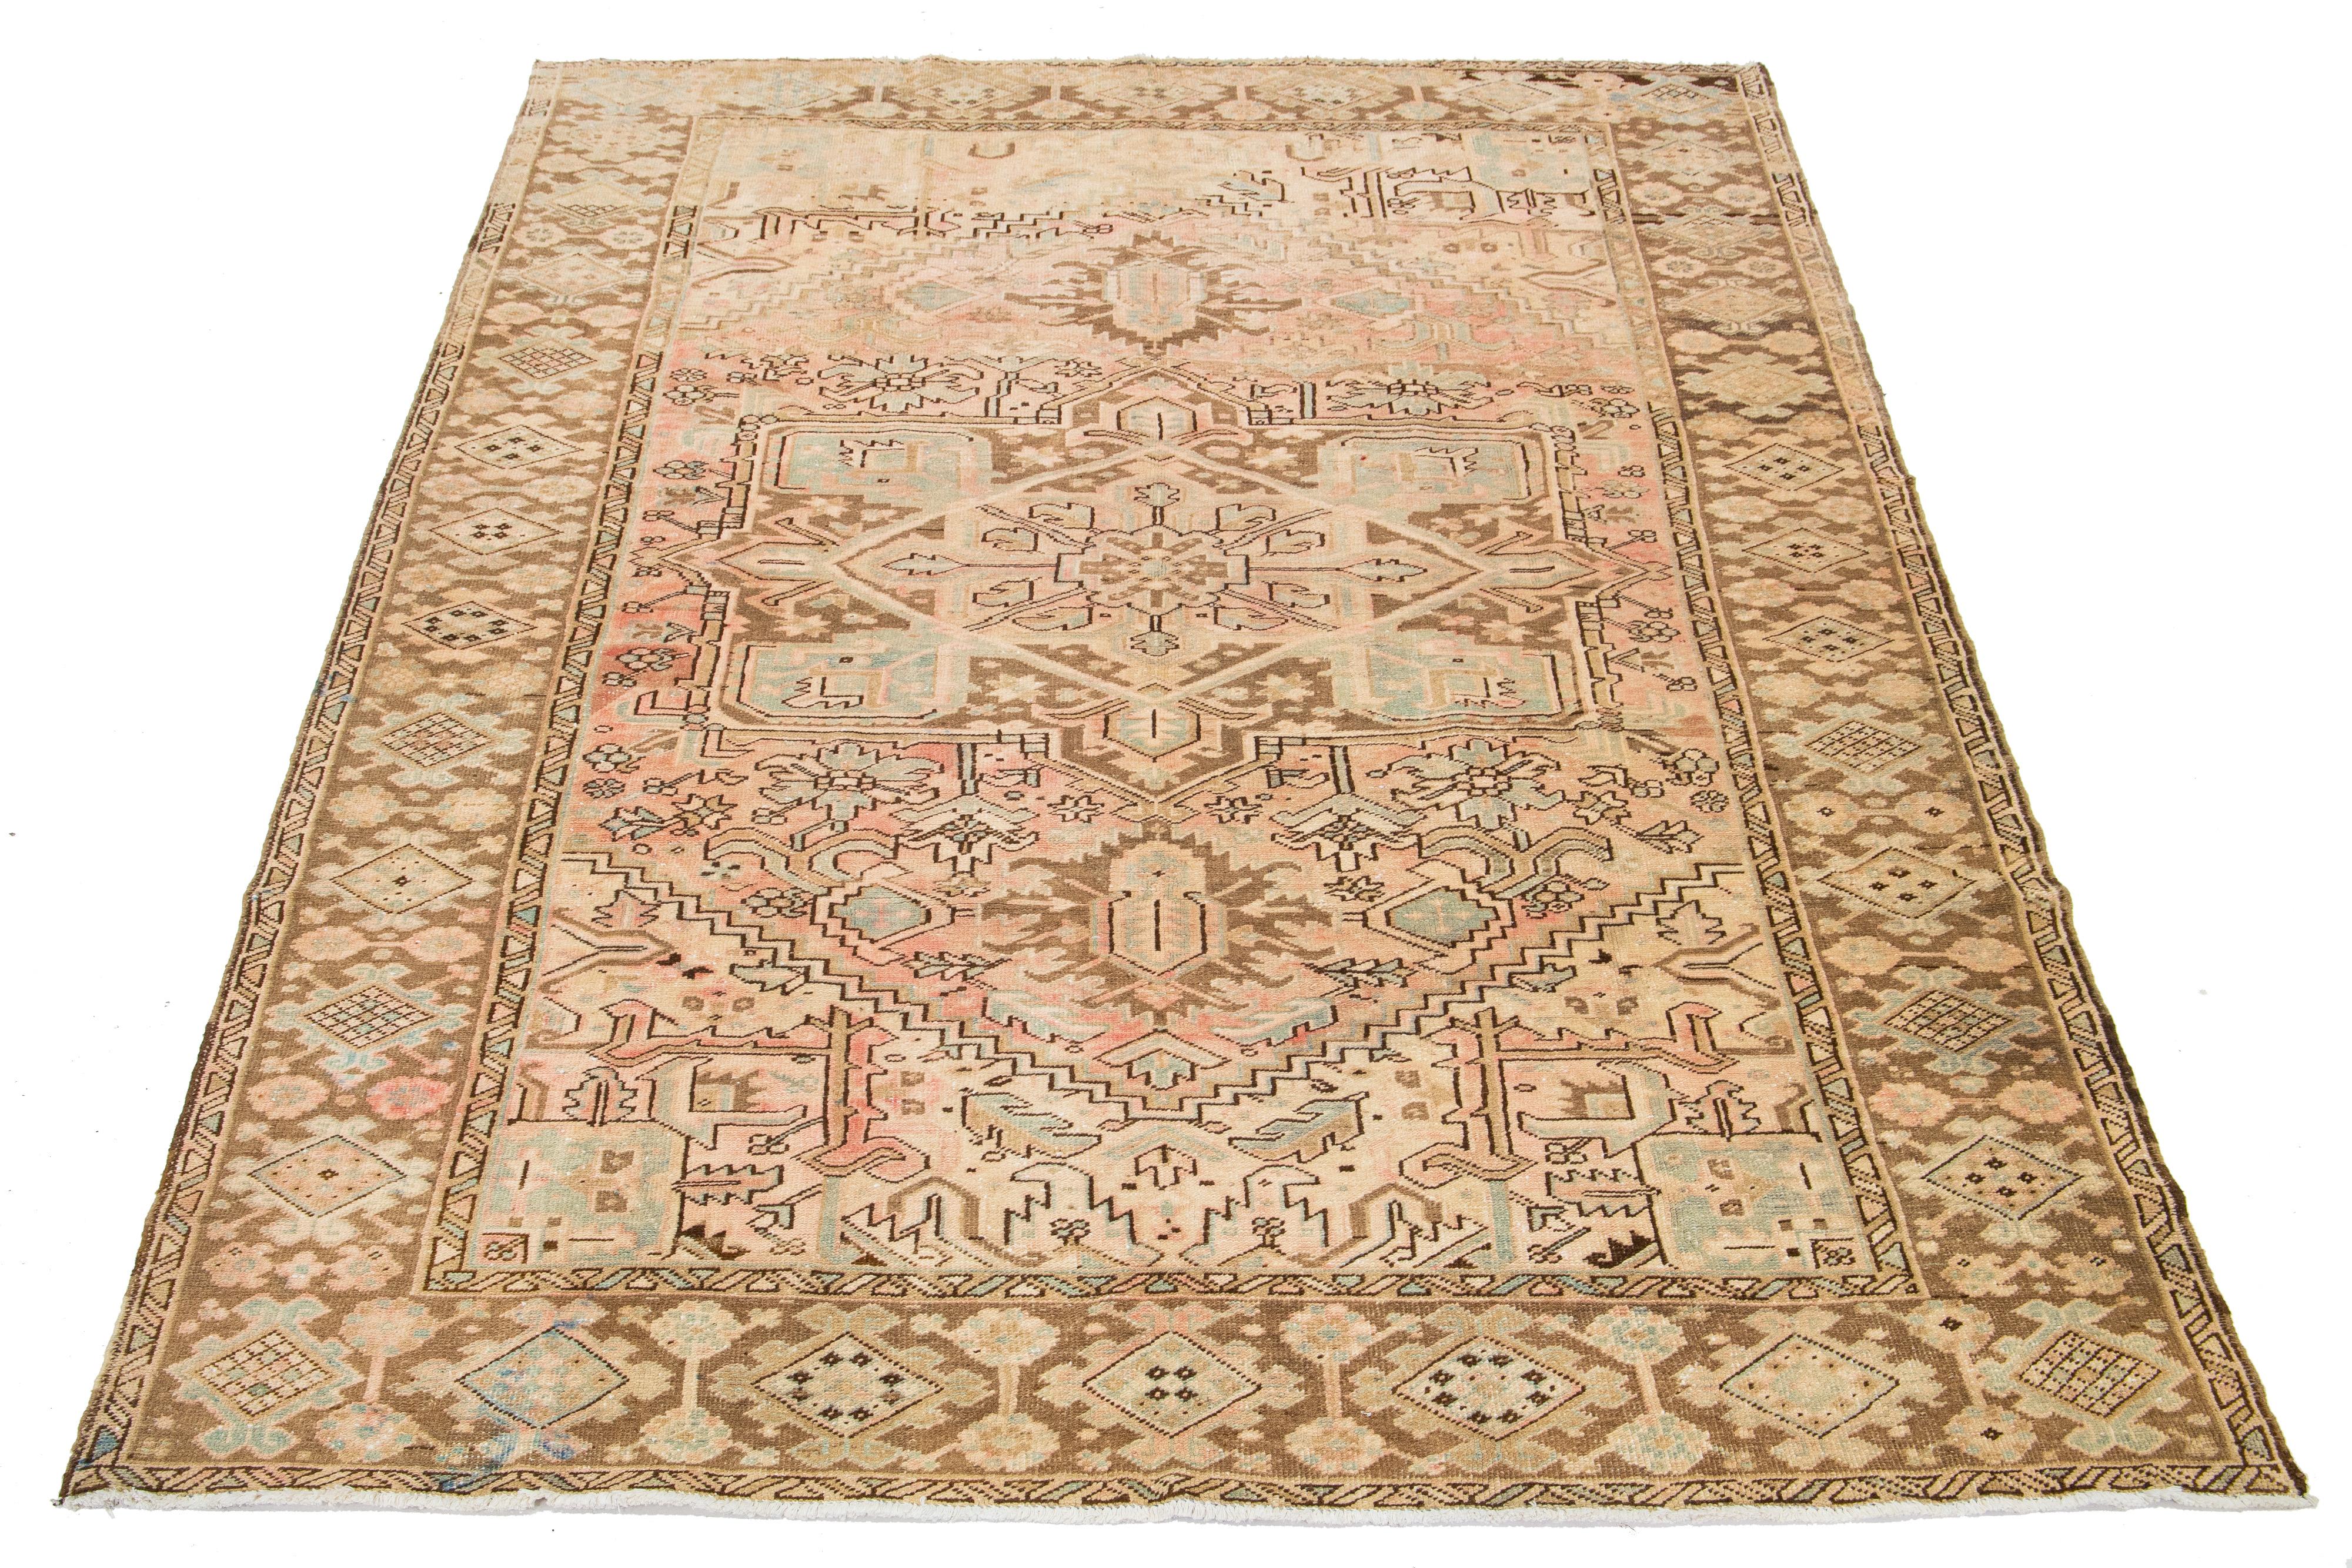 Beautiful room-size antique Malayer hand-knotted wool rug with a peach color field. This Persian rug has a gorgeous medallion design with blue and brown accents.

This rug measures 8'1